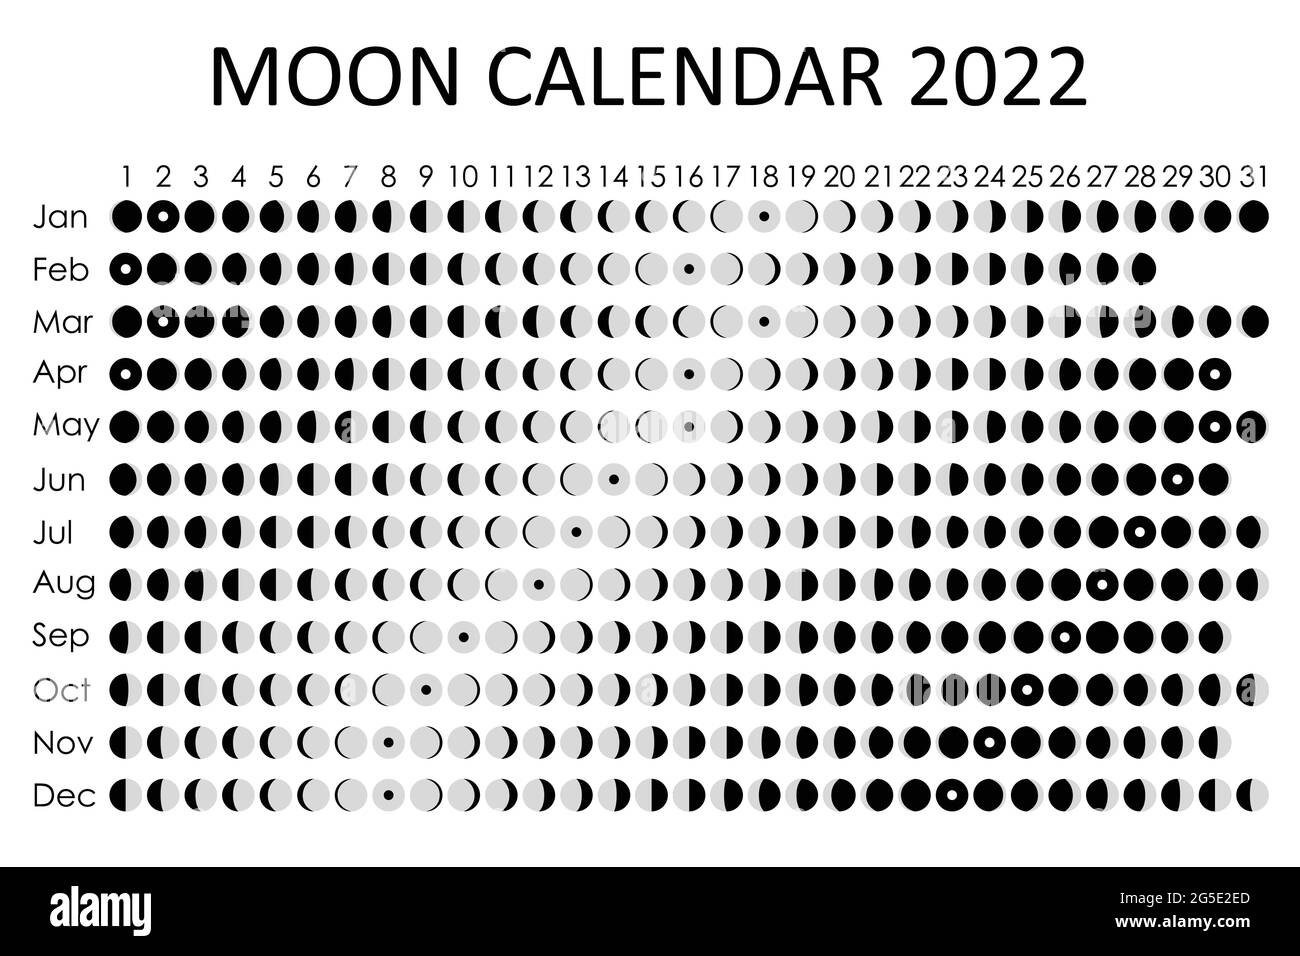 Lunar Phase Calendar 2022 2022 Moon Calendar. Astrological Calendar Design. Planner. Place For  Stickers. Month Cycle Planner Mockup. Isolated Black And White Background  Stock Vector Image & Art - Alamy